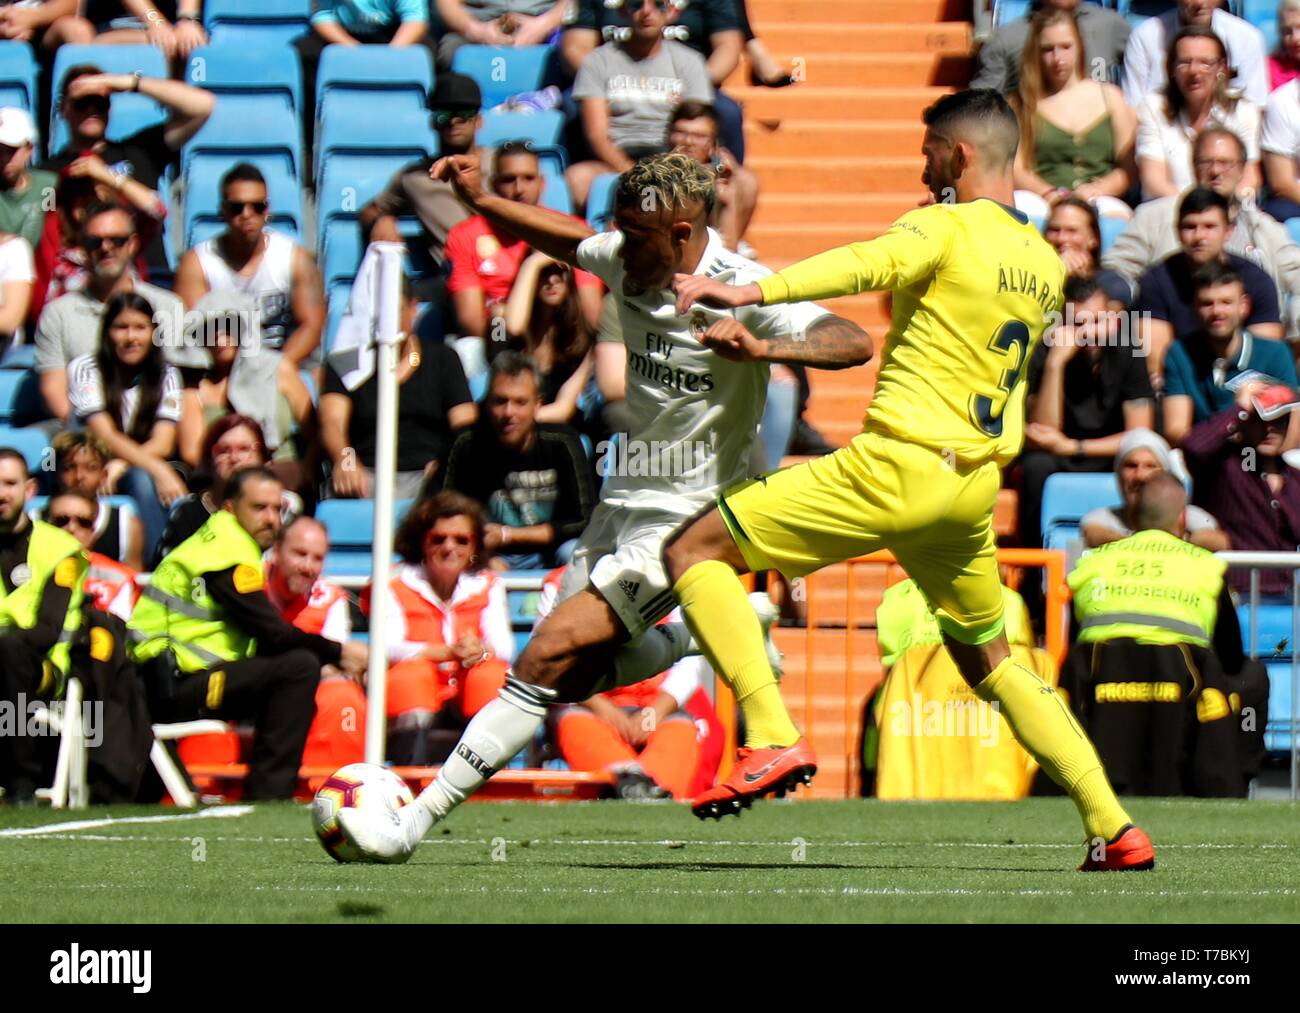 Madrid, Spain. 5th May, 2019. Real Madrid's Mariano Diaz Mejia (L) competes with Villarreal's Alvaro Gonzalez Soberon during a Spanish league match between Real Madrid and Villarreal in Madrid, Spain, on May. 5, 2019. Real Madrid won 3-2. Credit: Edward F. Peters/Xinhua/Alamy Live News Stock Photo